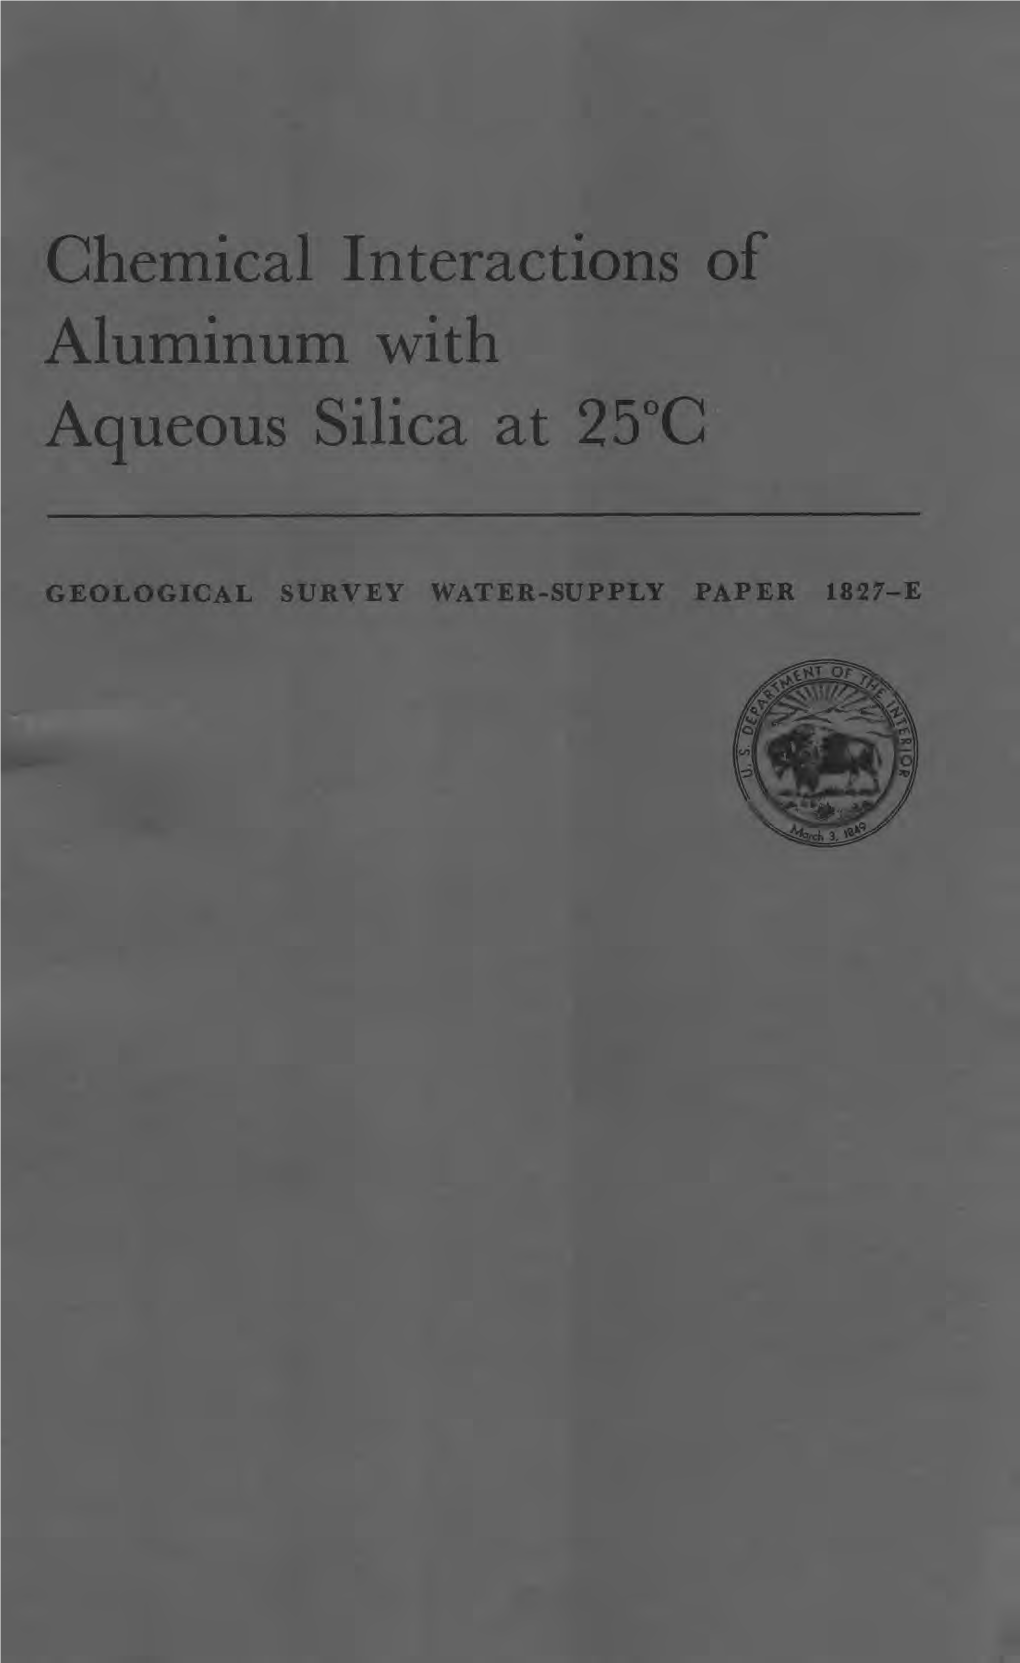 Chemical Interactions of Aluminum with Aqueous Silica at 25°C